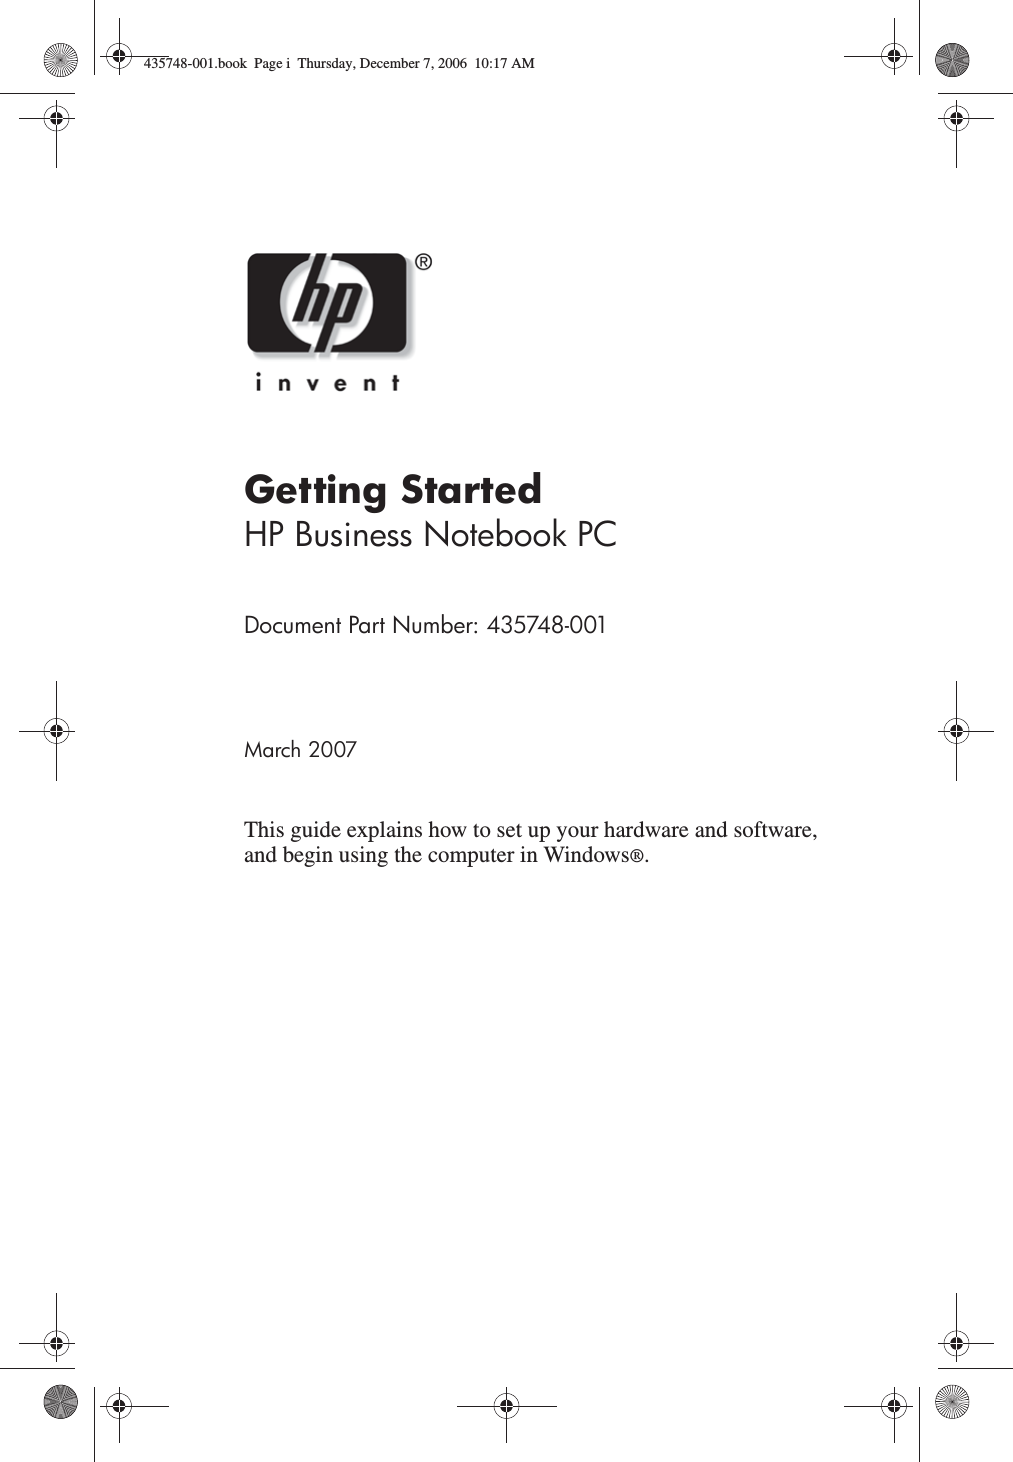 Getting StartedHP Business Notebook PCDocument Part Number: 435748-001March 2007This guide explains how to set up your hardware and software, and begin using the computer in Windows®.435748-001.book  Page i  Thursday, December 7, 2006  10:17 AM